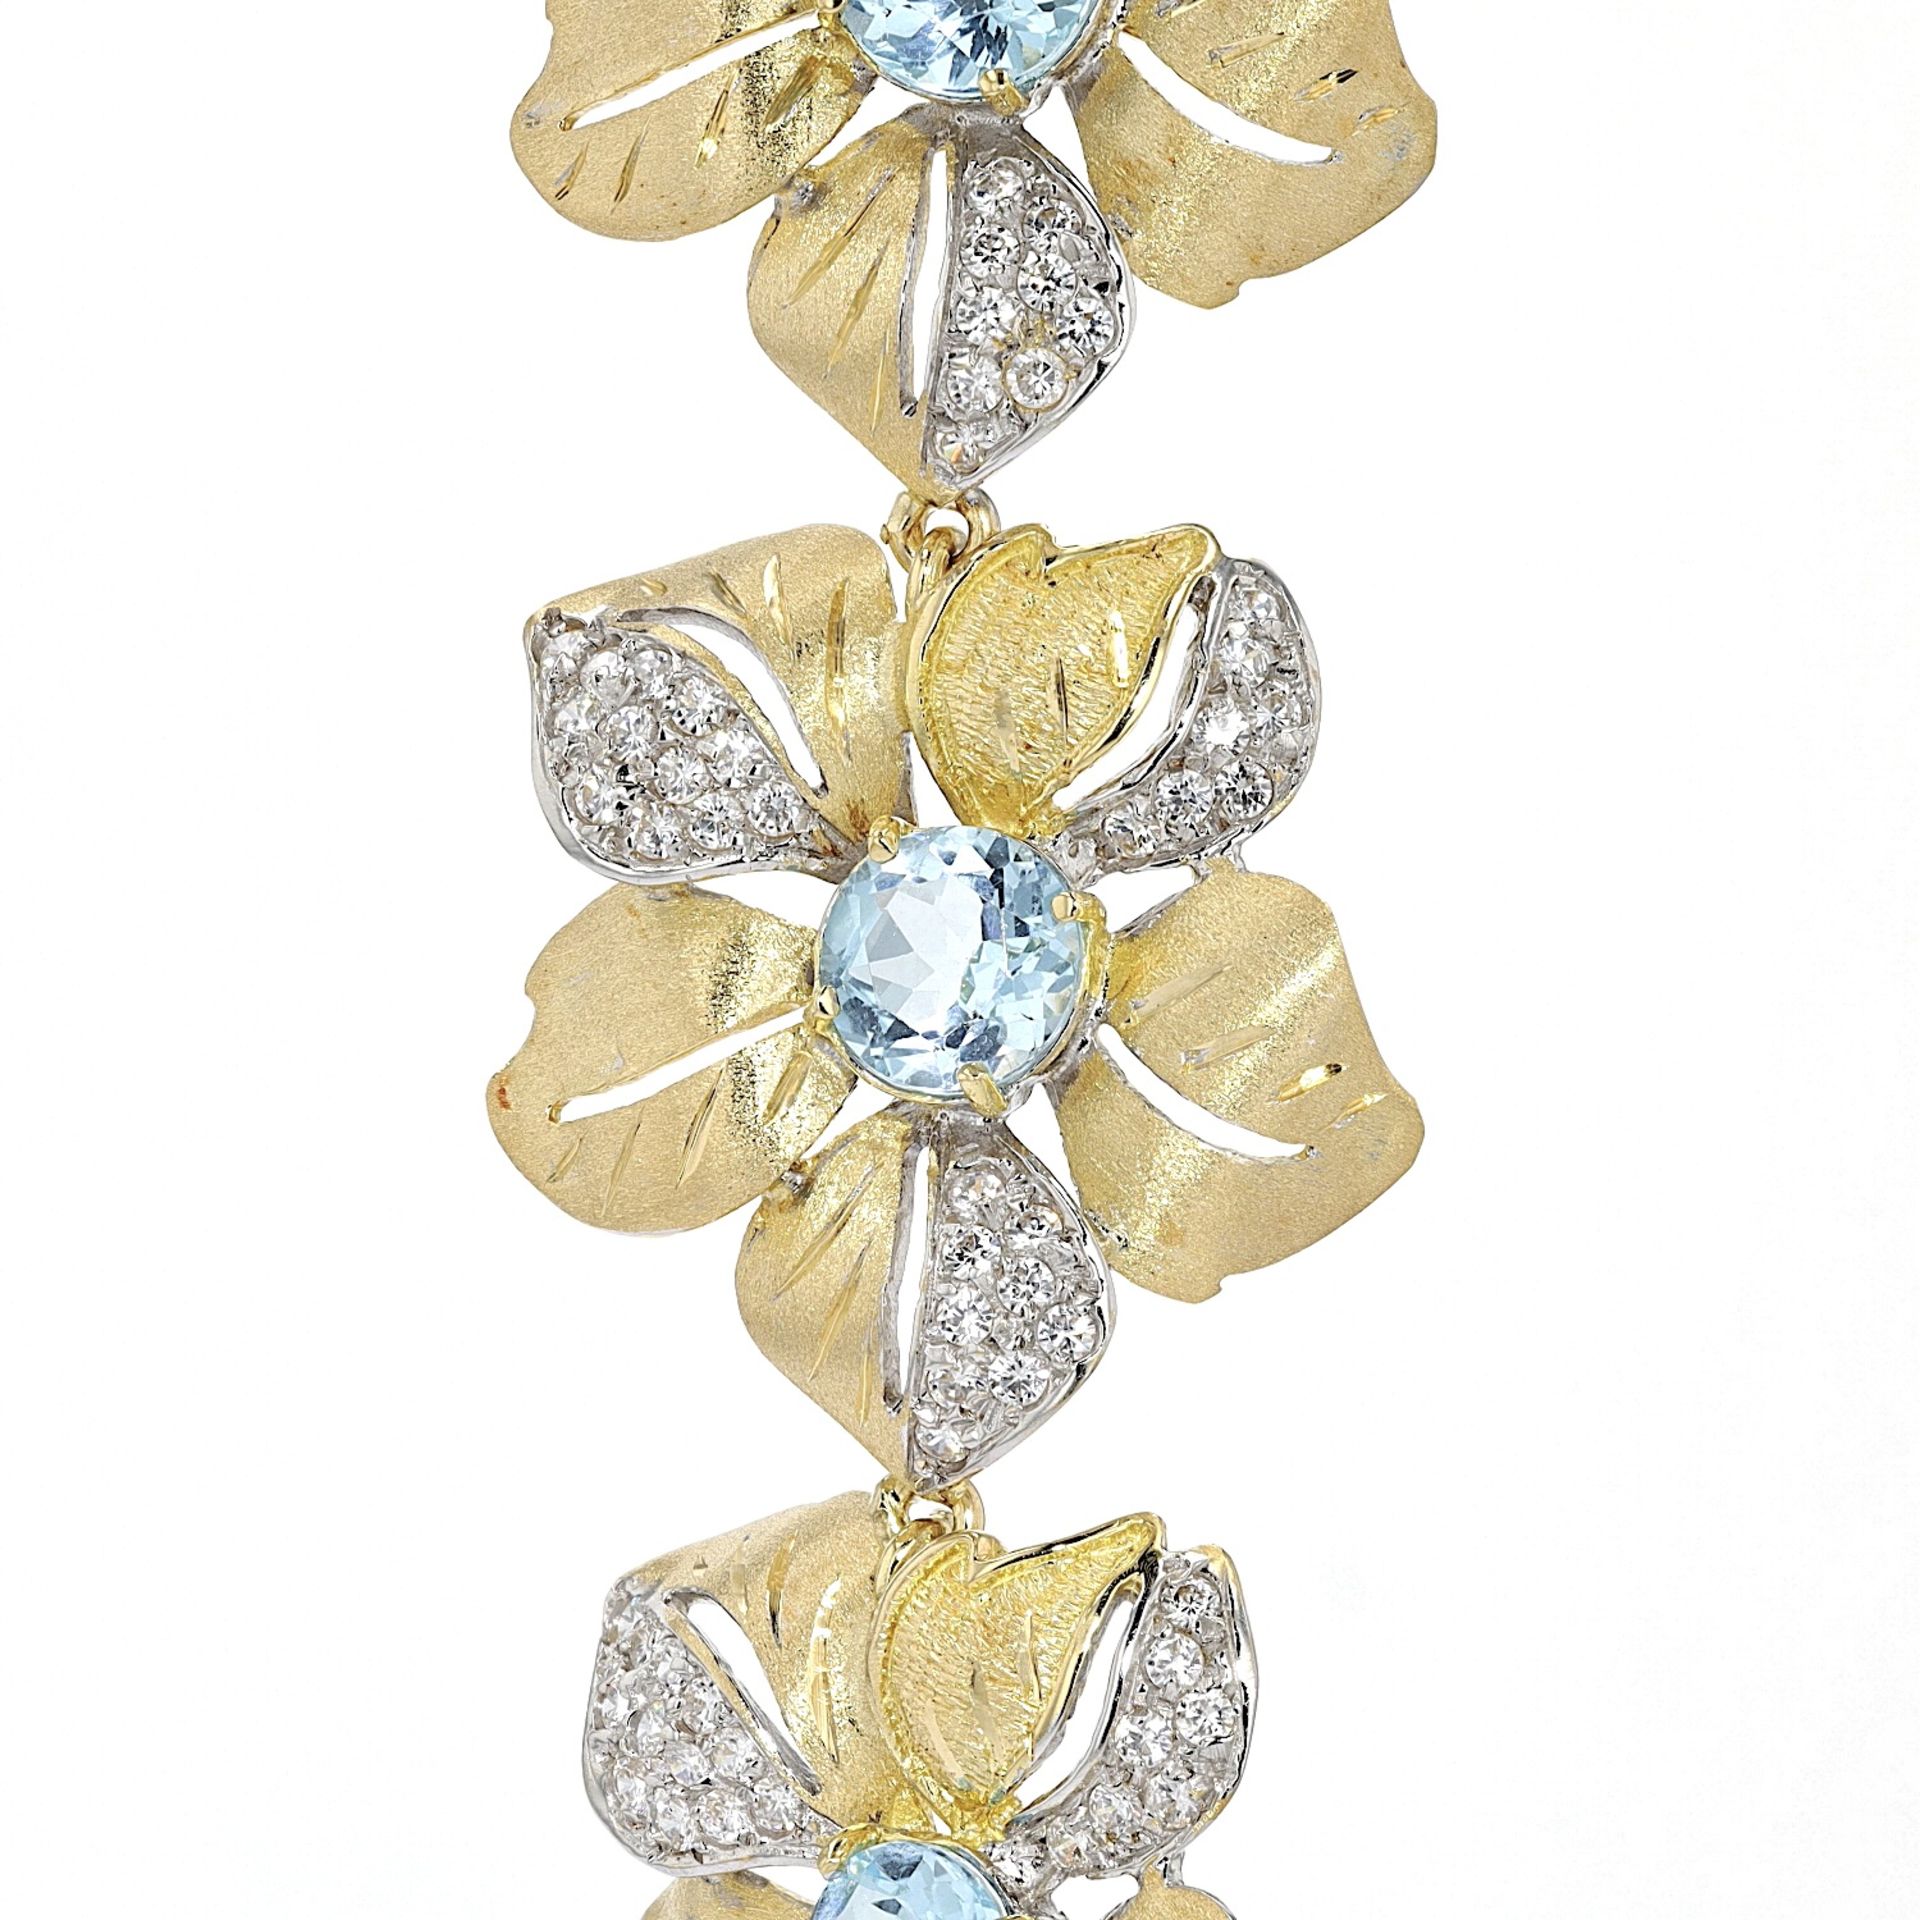 Bracelet, 750 gold with topazes and cubic zirconias - Image 3 of 4